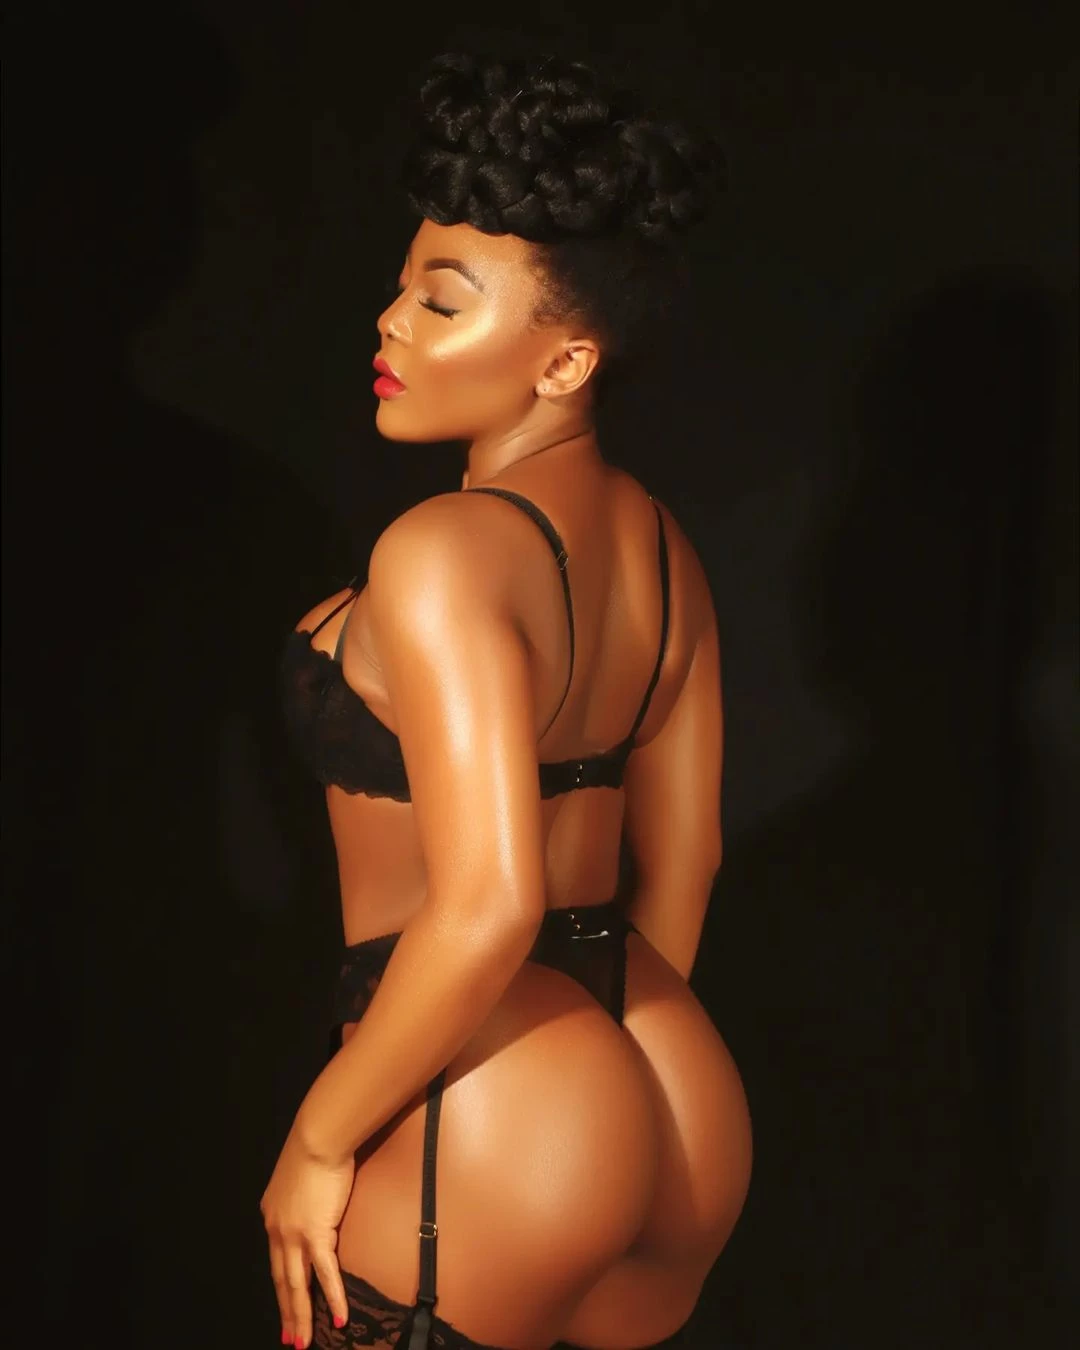 Reality TV star, "Ifuennada" shows off her butt in racy photos, Reality TV star, &#8220;Ifuennada&#8221; shows off her butt in racy photos, INFINITY LOADED